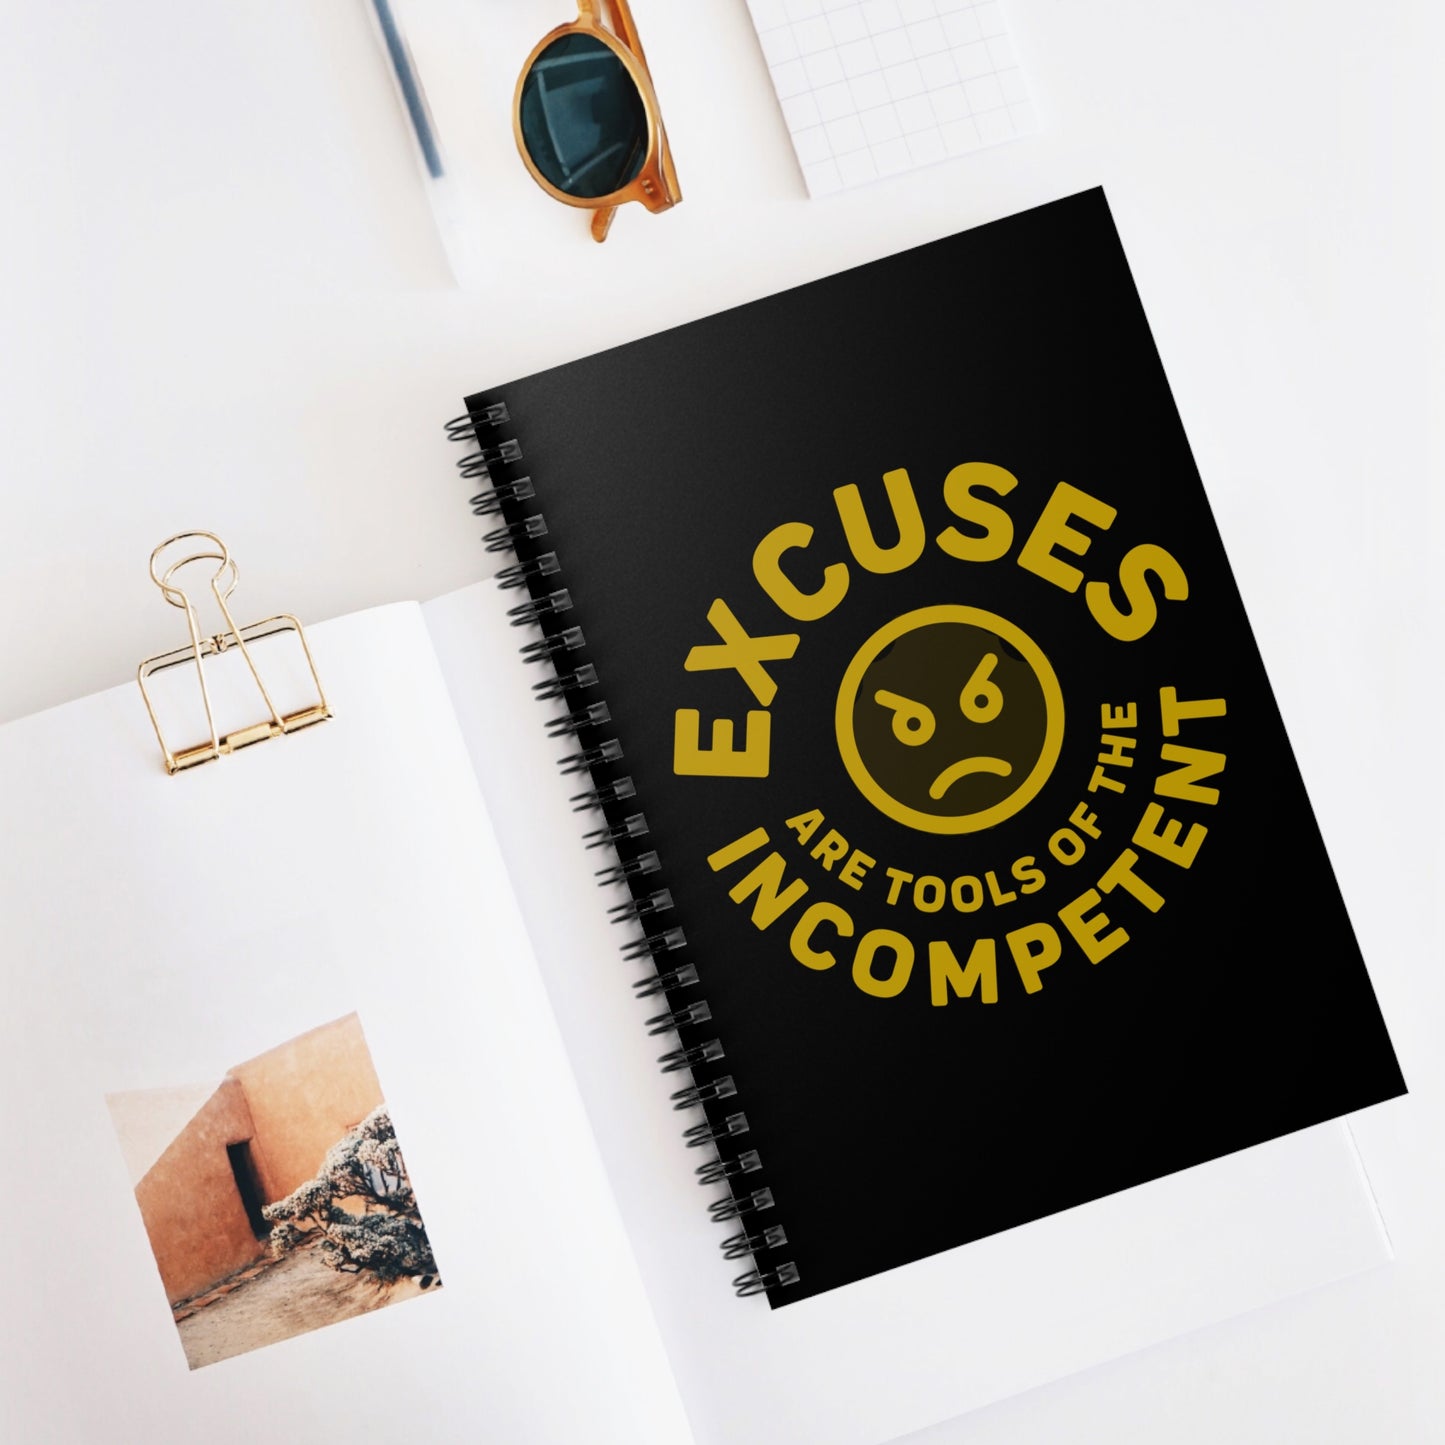 Excuses Notebook - Old Gold on Black